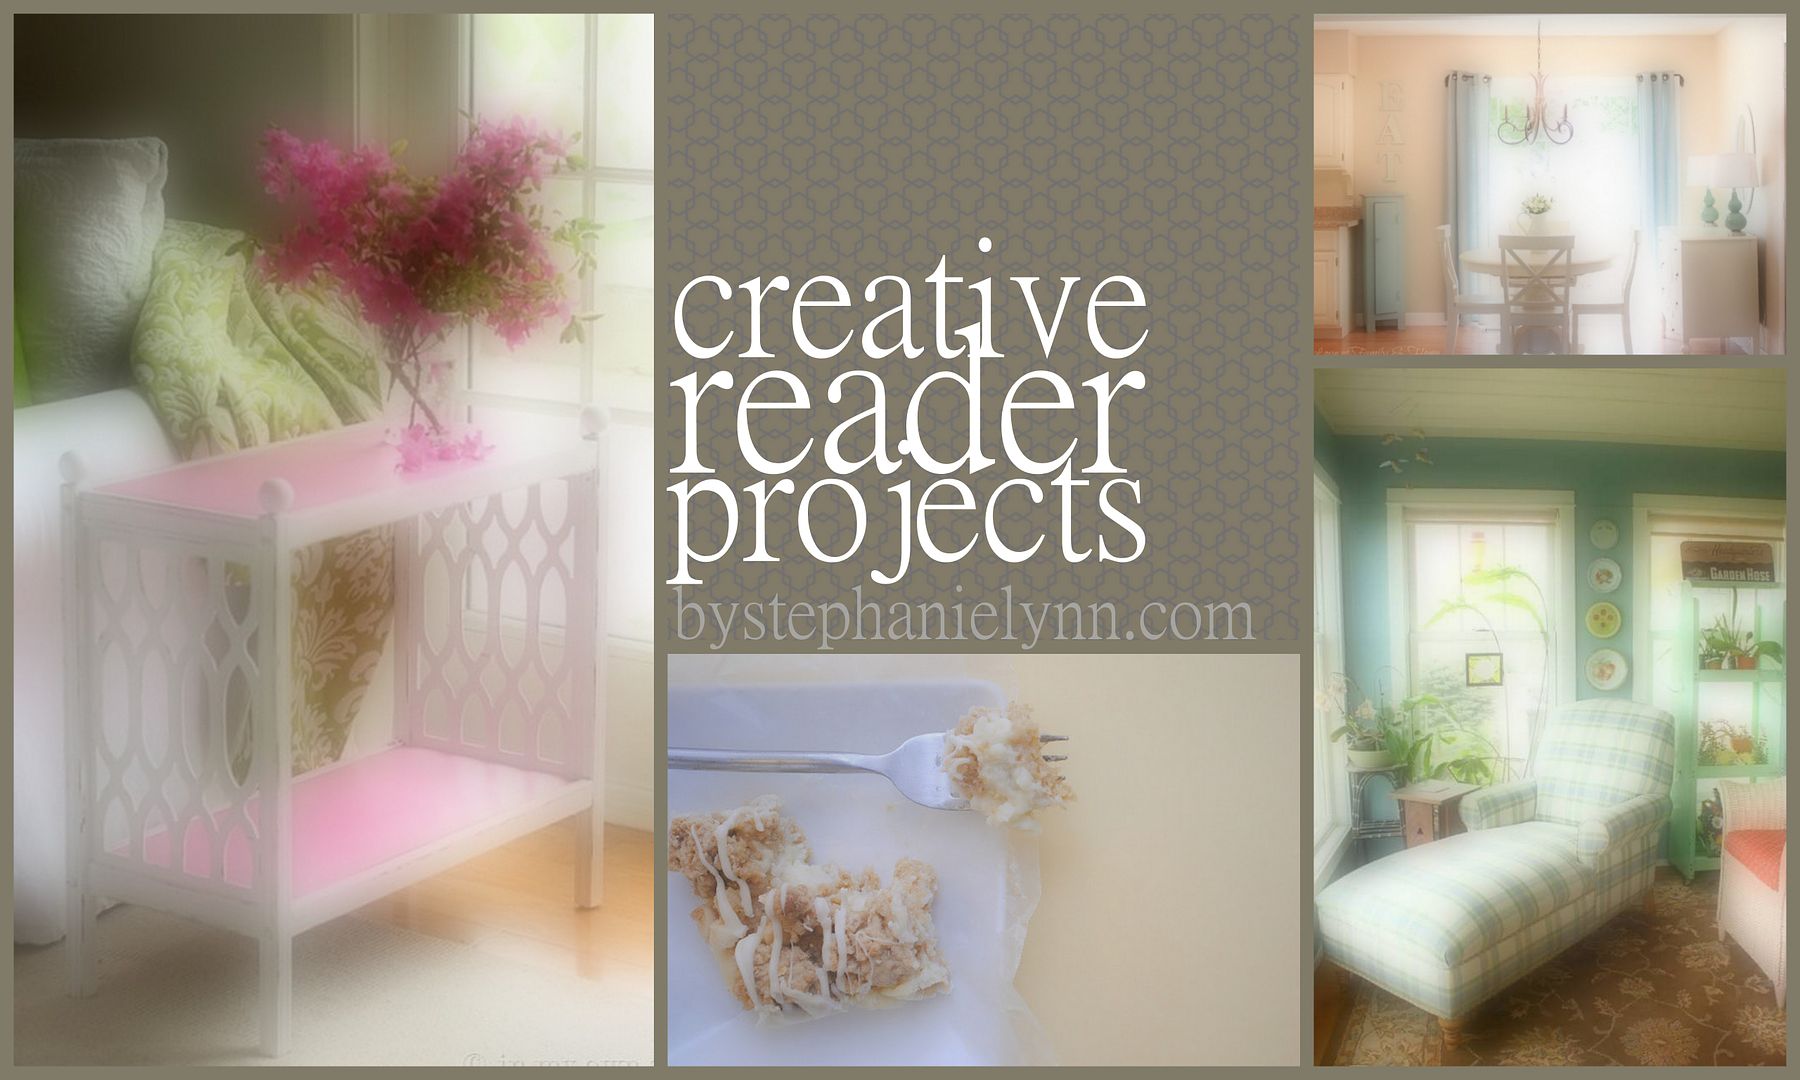 Creative Reader Projects No. 176: Inspiring Makeovers, Crafts, Decor, and Recipes